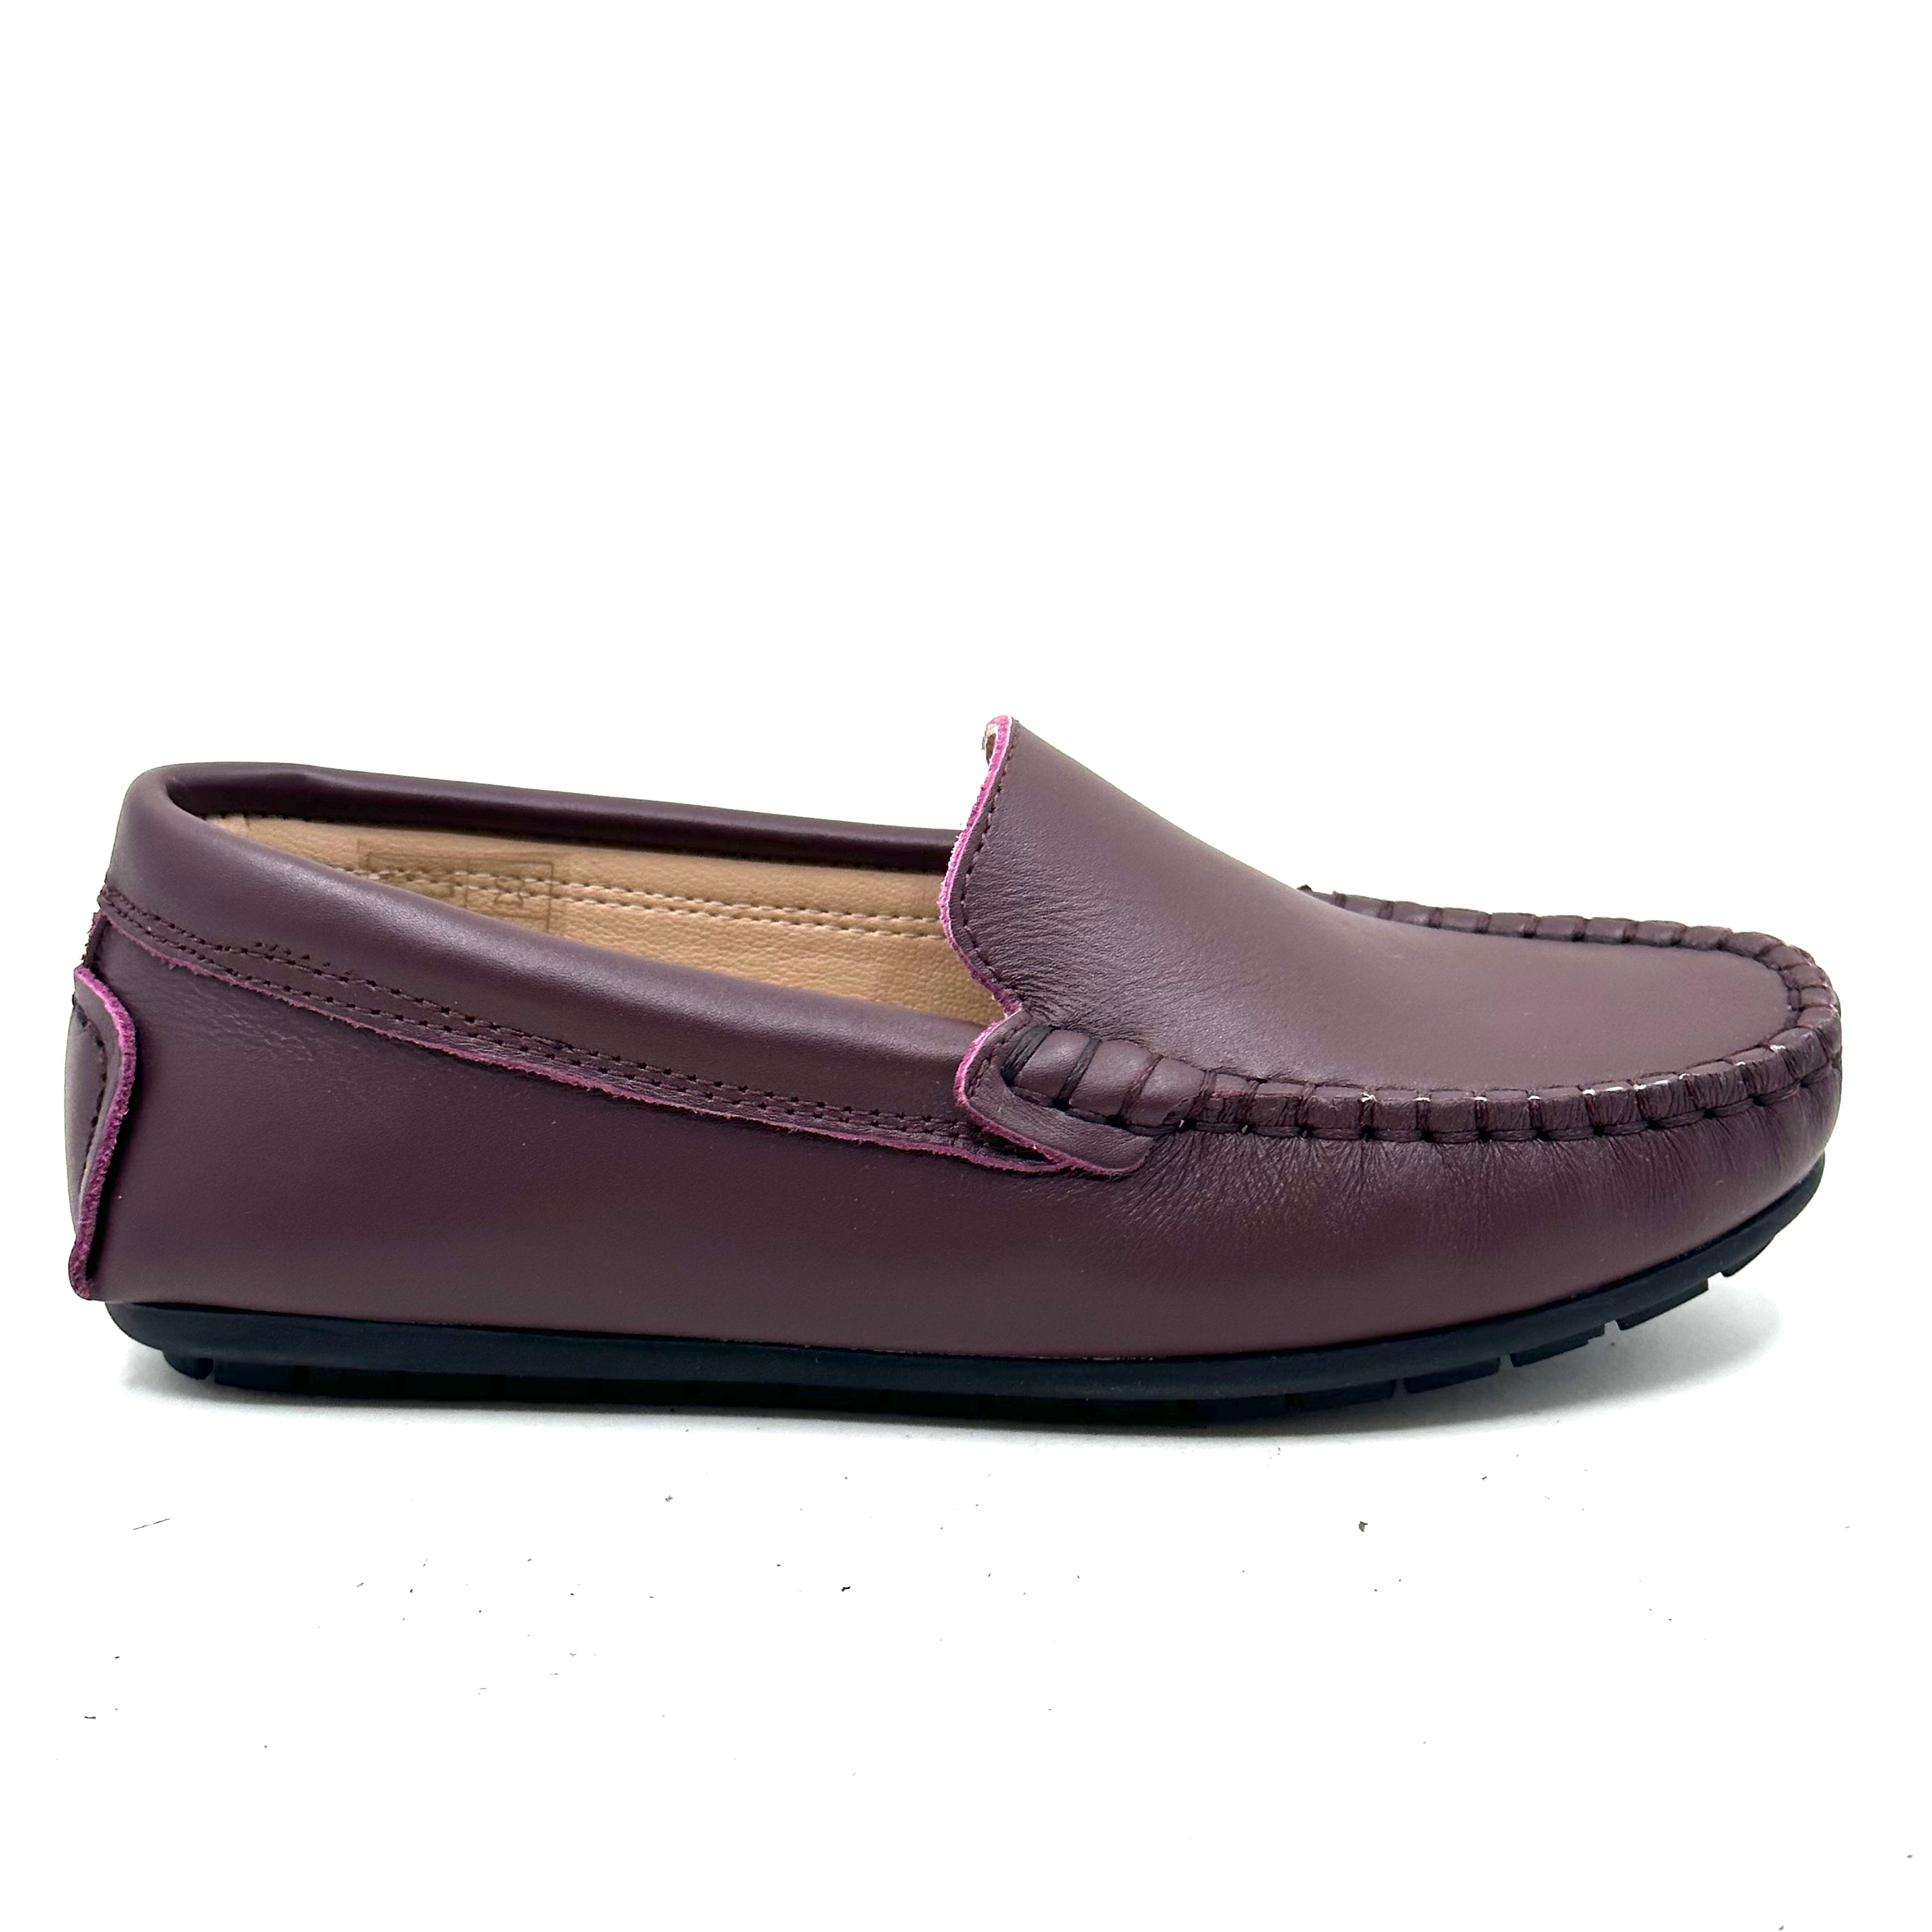 Perroquet Burgundy Leather Loafer – Sole mates